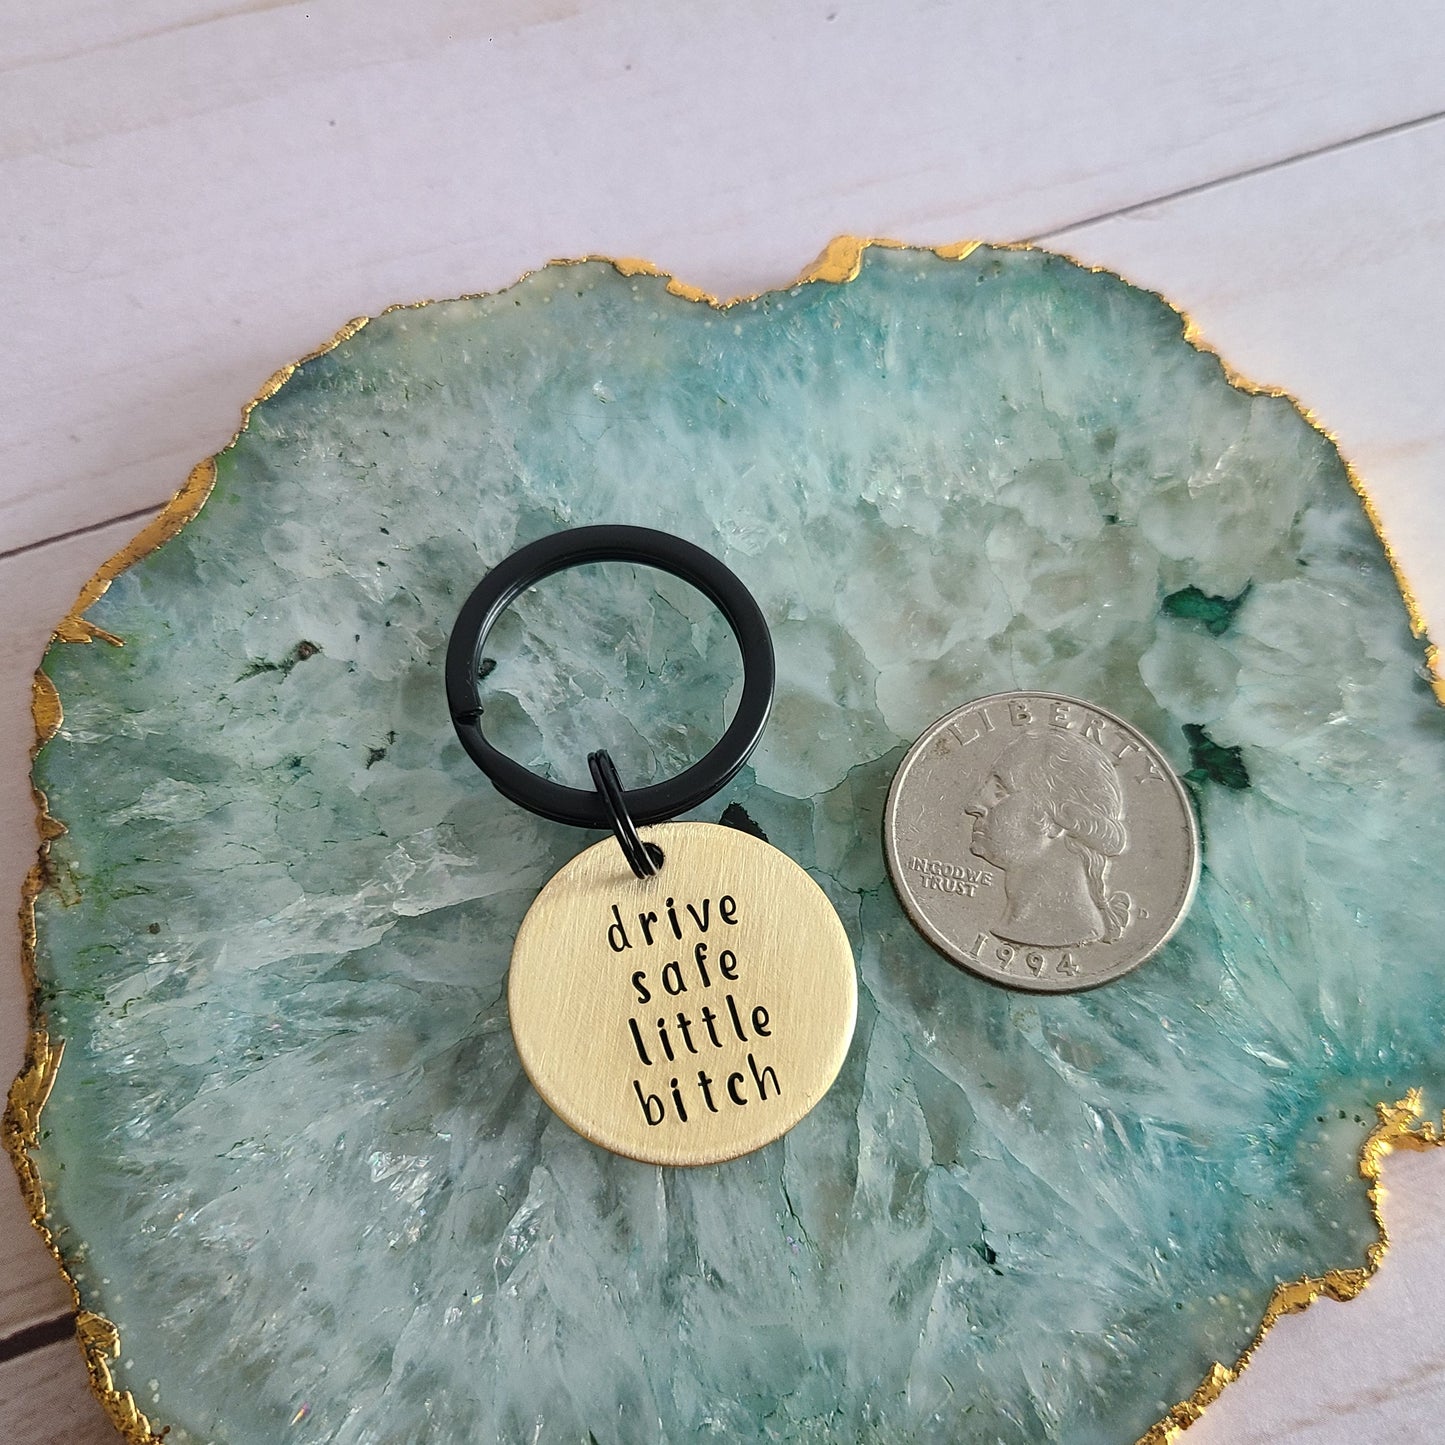 Drive Safe Little Bitch Keychain, Hand Stamped Keychain For Sister, Brass Key Chain, New Driver Keychain for Her, Funny Little Sister Gifts